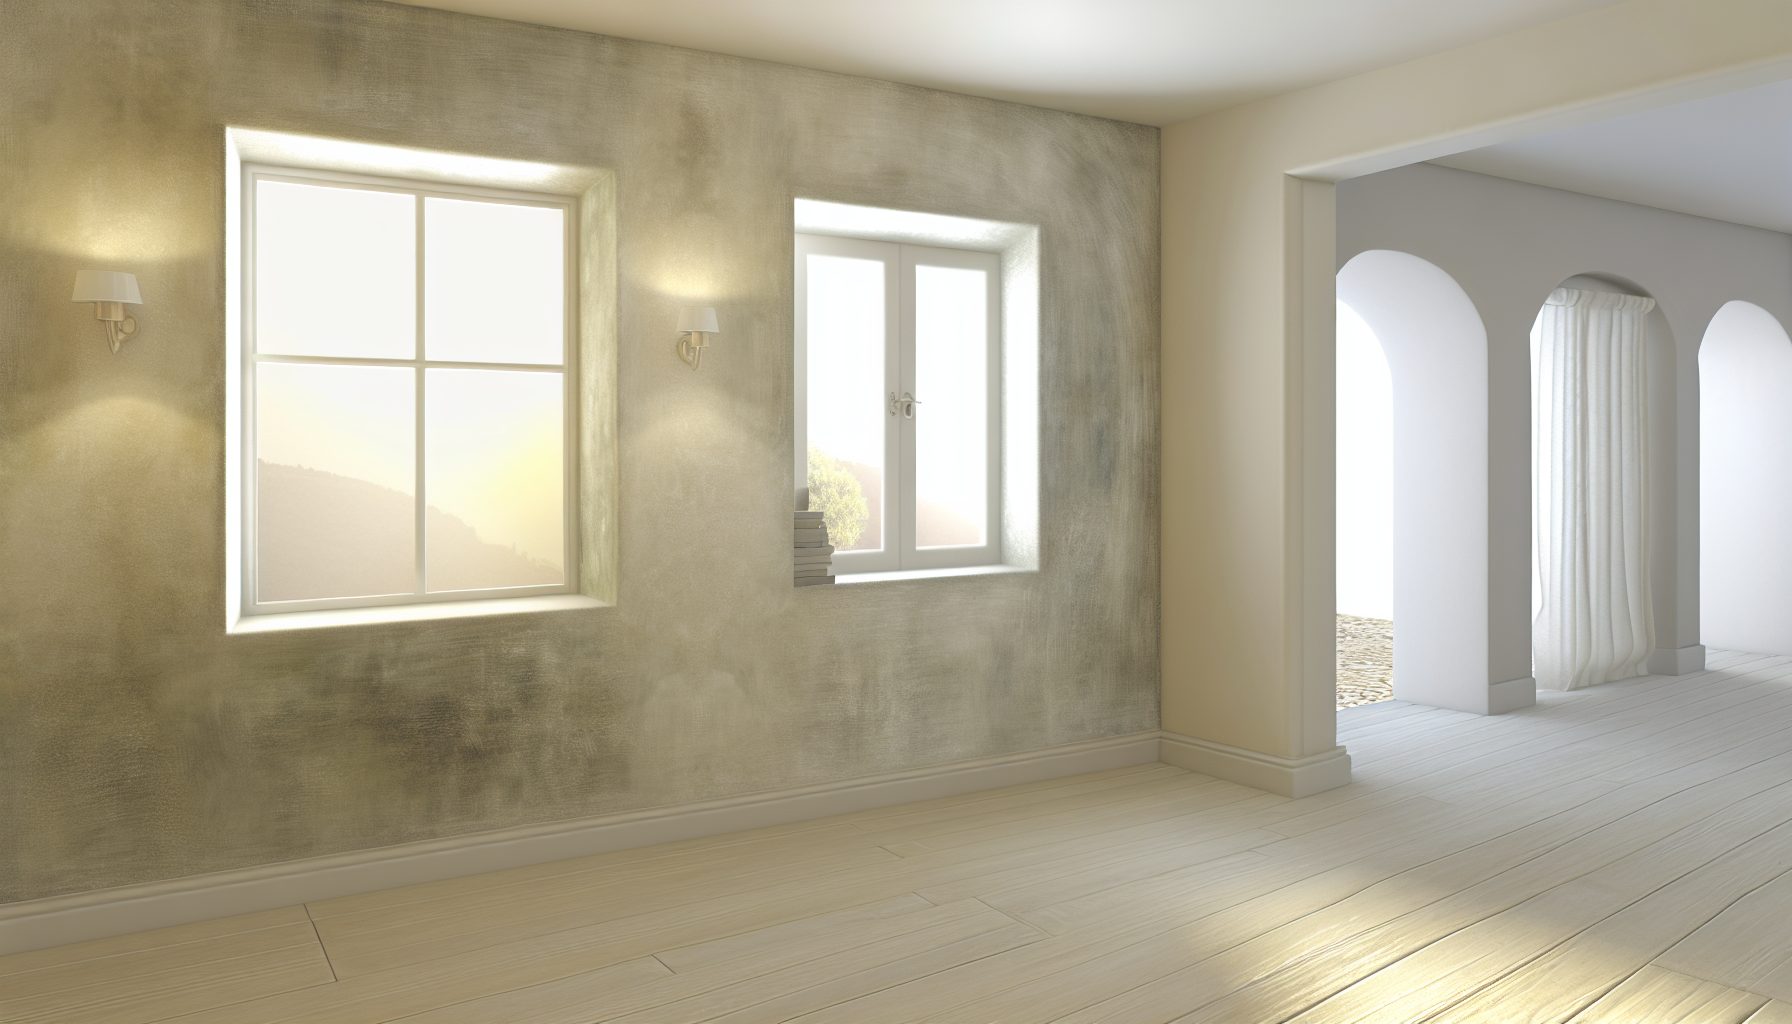 A beautiful interior wall painted with limewash, creating a warm and inviting atmosphere